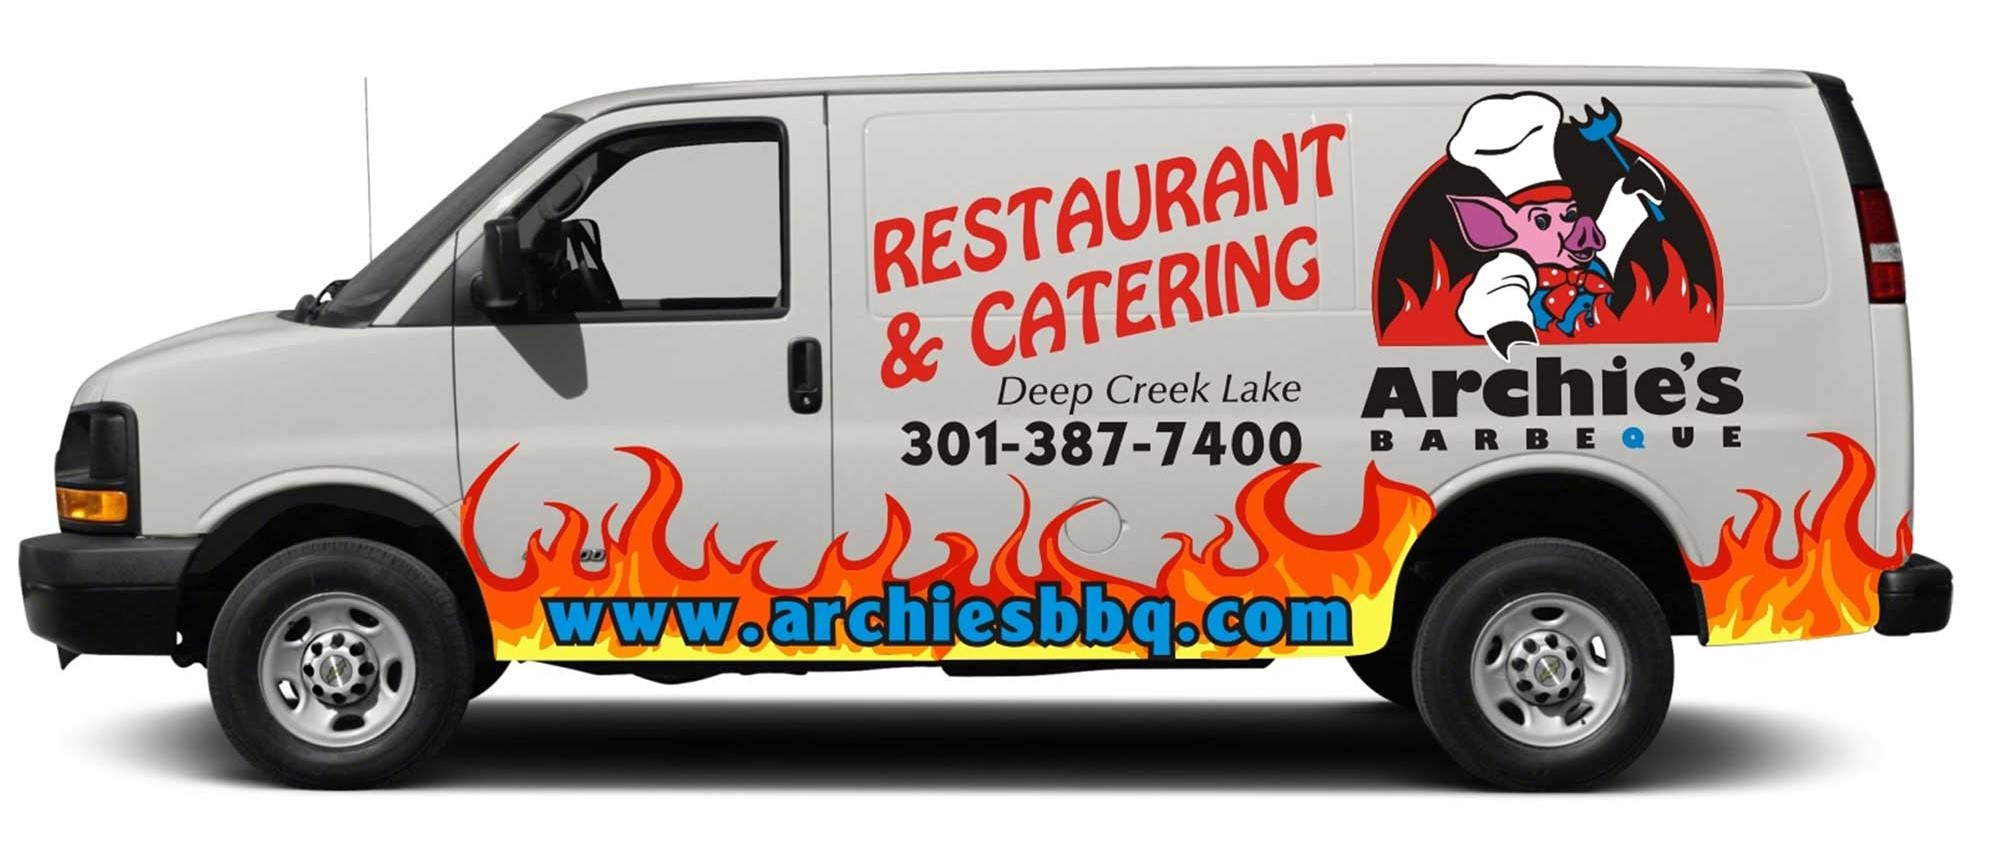 Archies BBQ Catering: Deep Creek Lake, MD